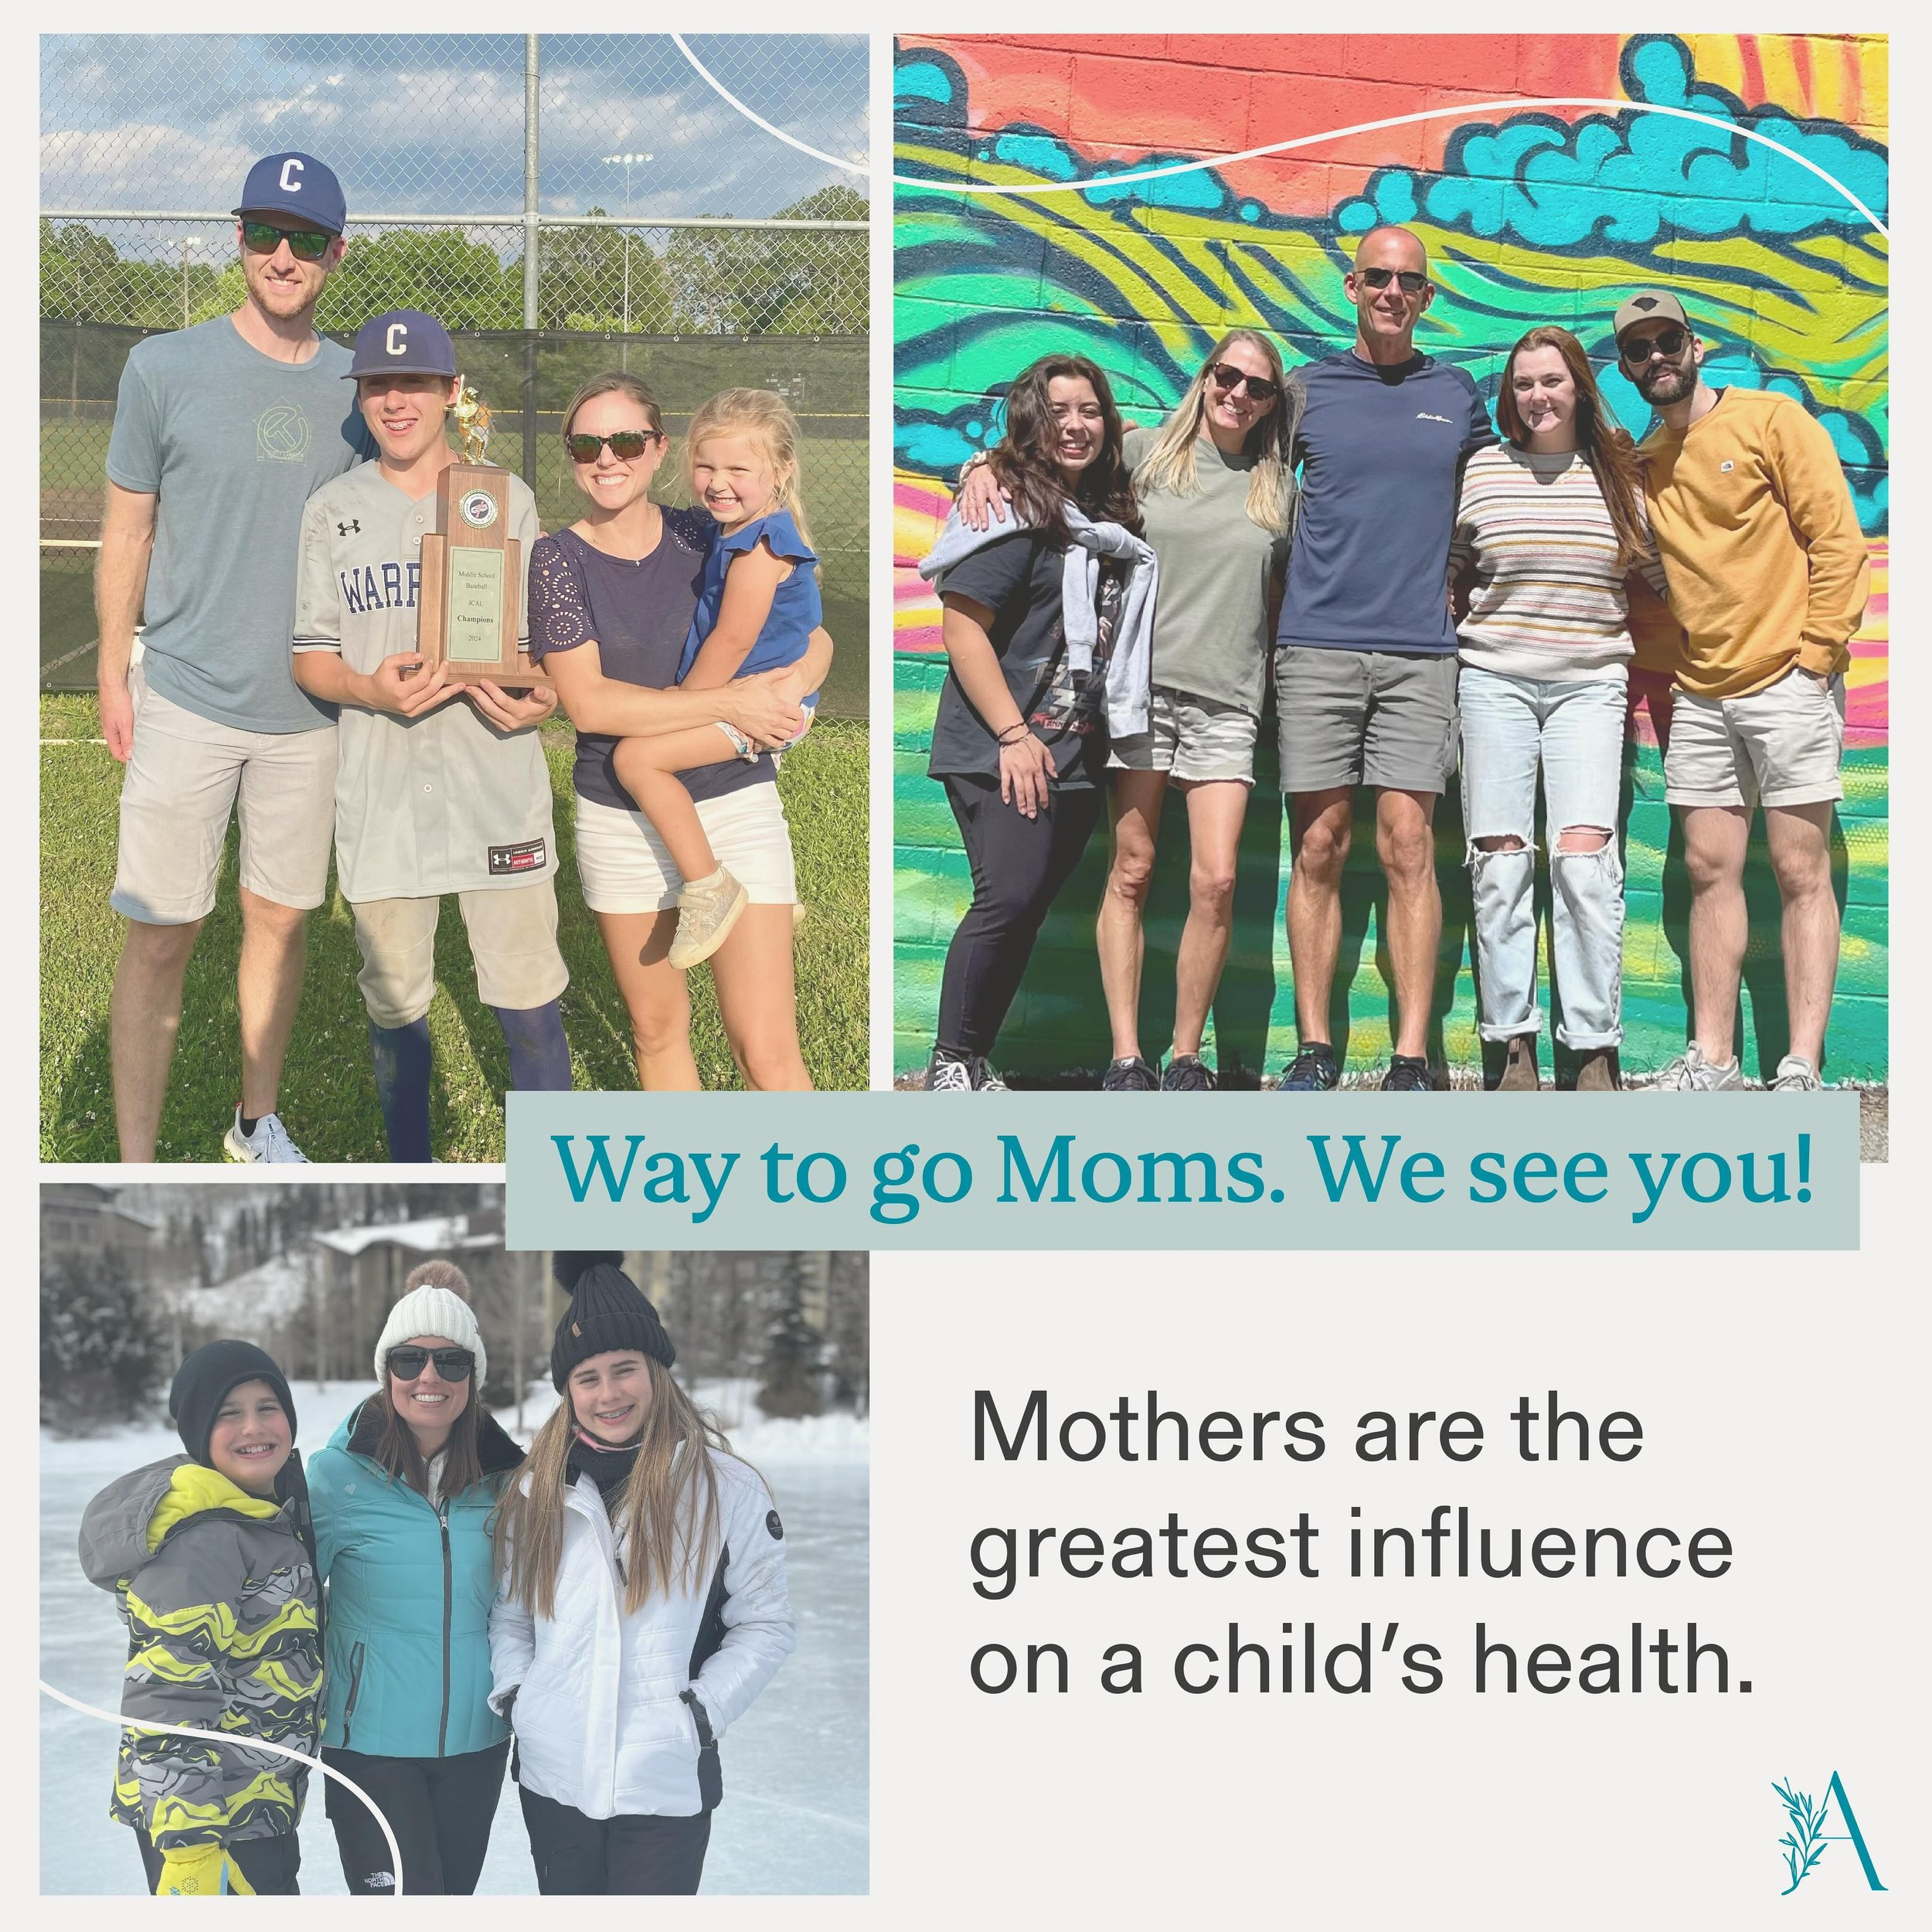 Amidst the daily hustle, it&rsquo;s easy for moms to prioritize everyone else&rsquo;s needs above their own. However, it&rsquo;s crucial to recognize that a mom&rsquo;s health serves as the cornerstone of her family&rsquo;s well-being.
-
Moms serve a